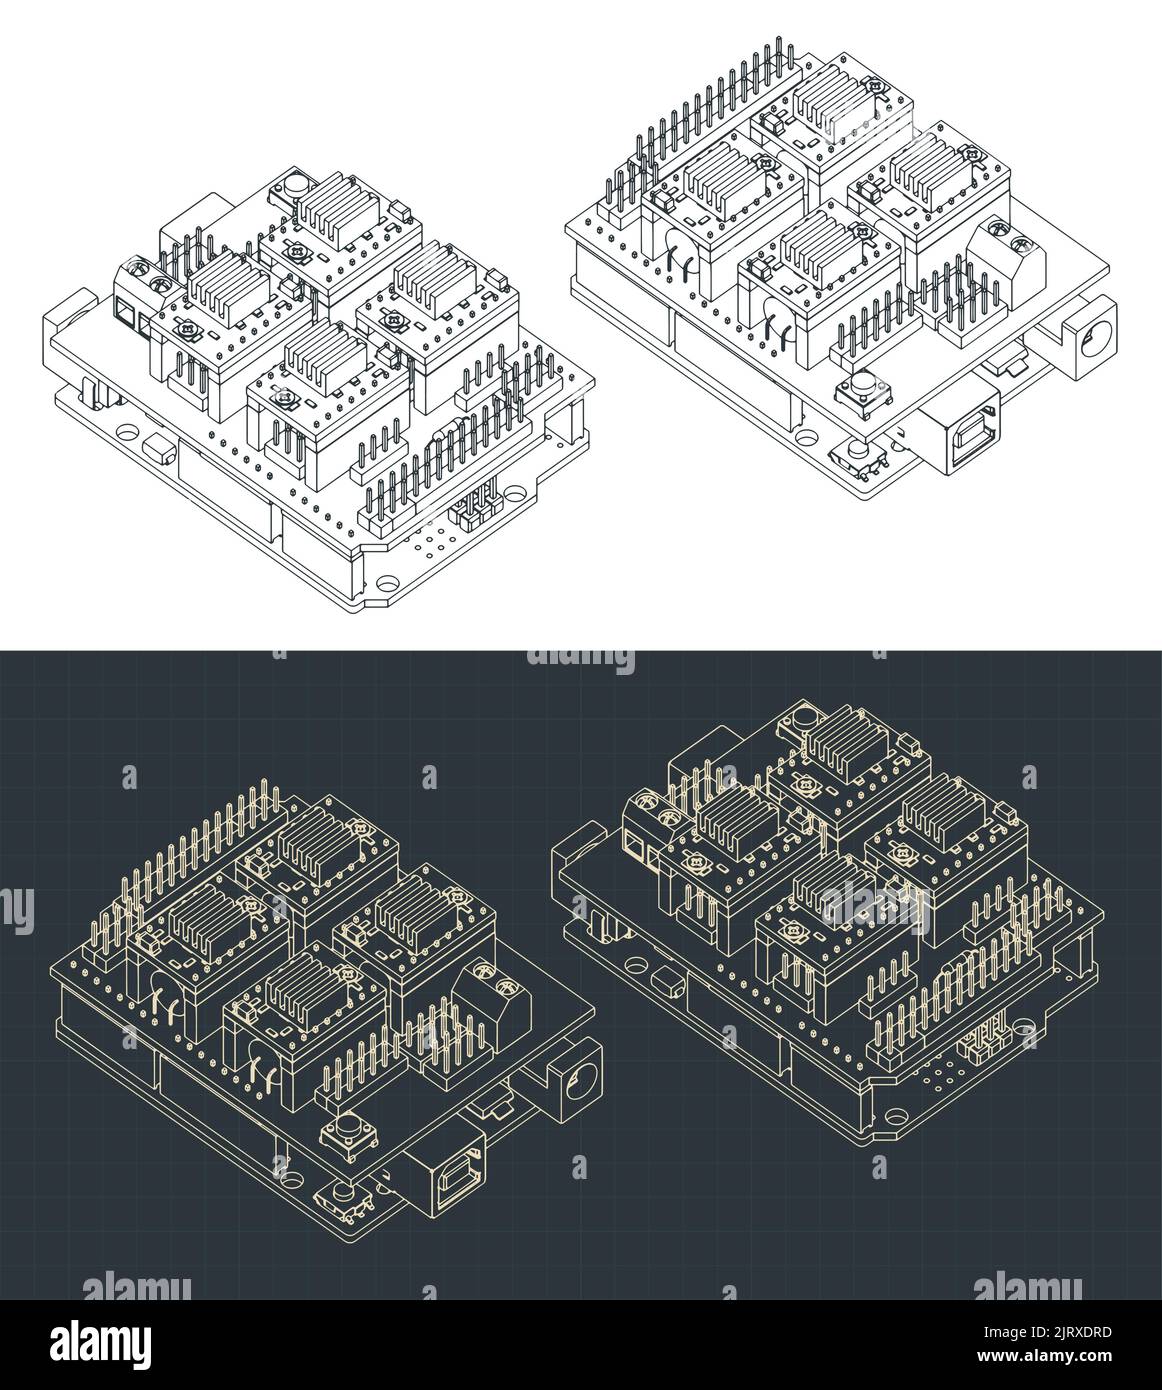 Stylized vector illustration of isometric blueprints of Arduino Uno and CNC shield Stock Vector